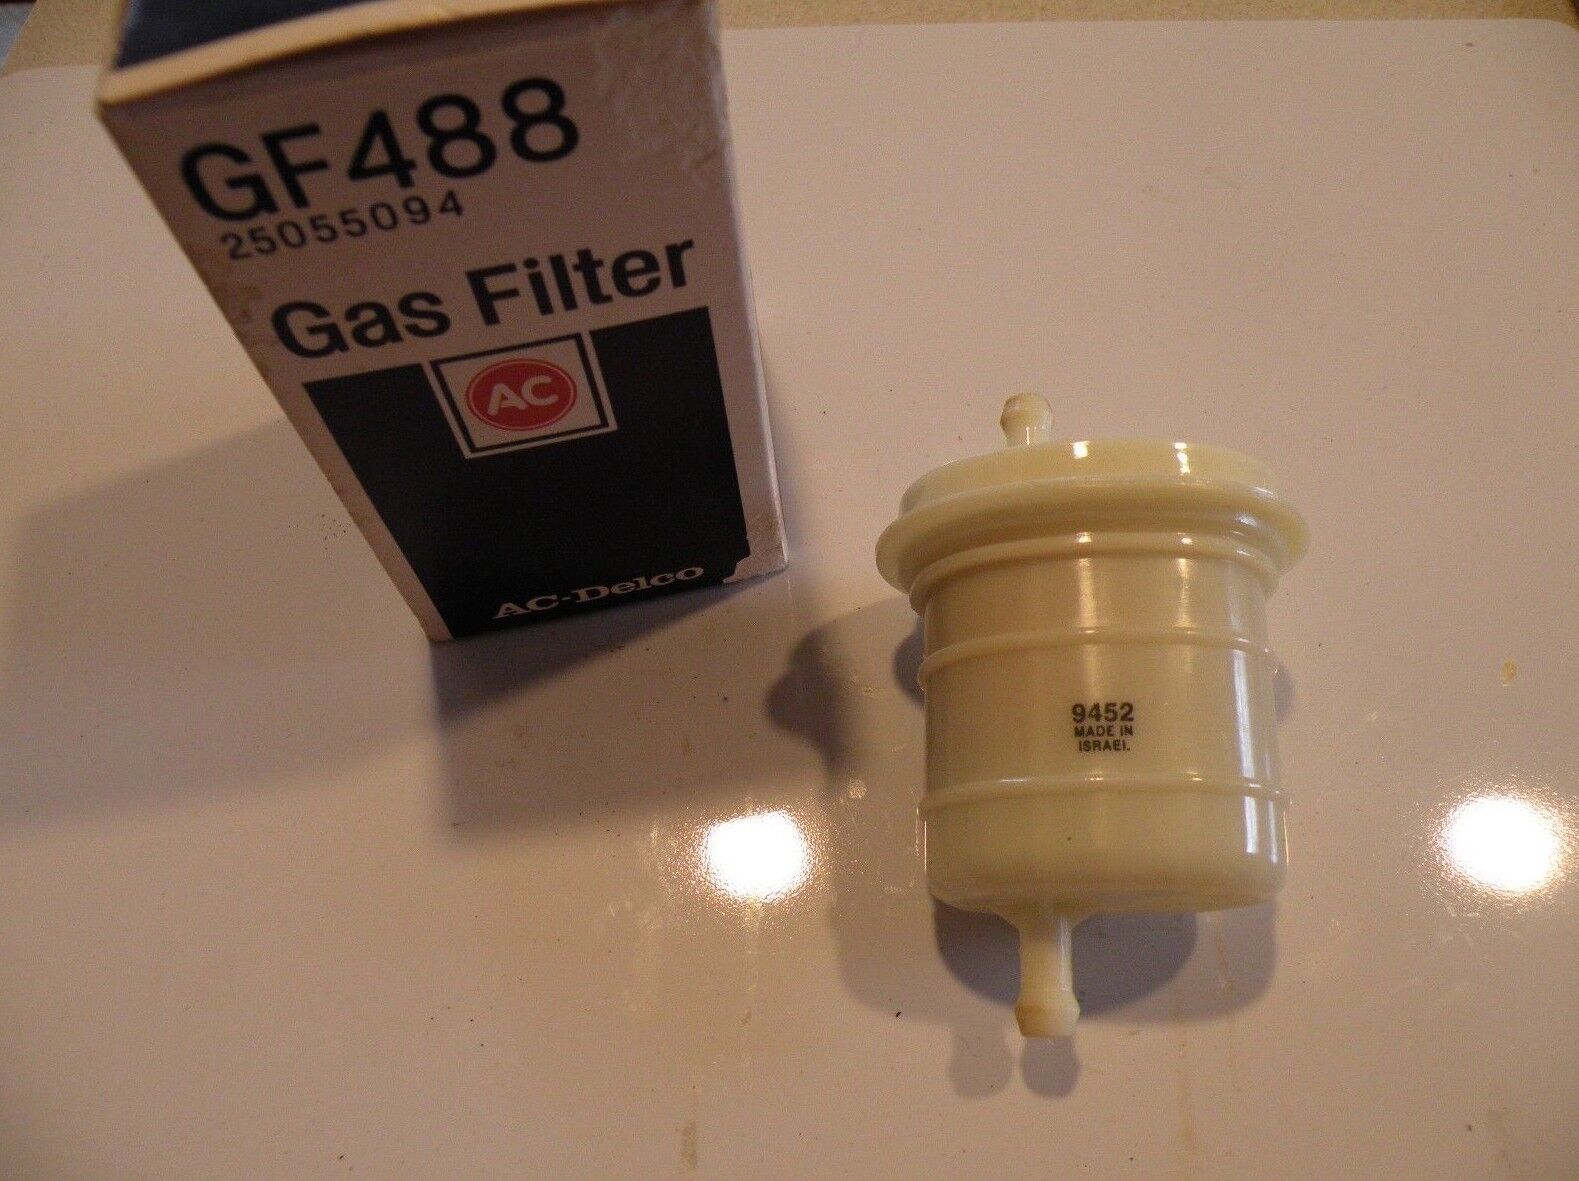 ACDelco GF488 It is very popular Fuel Filter bx330 Max 54% OFF